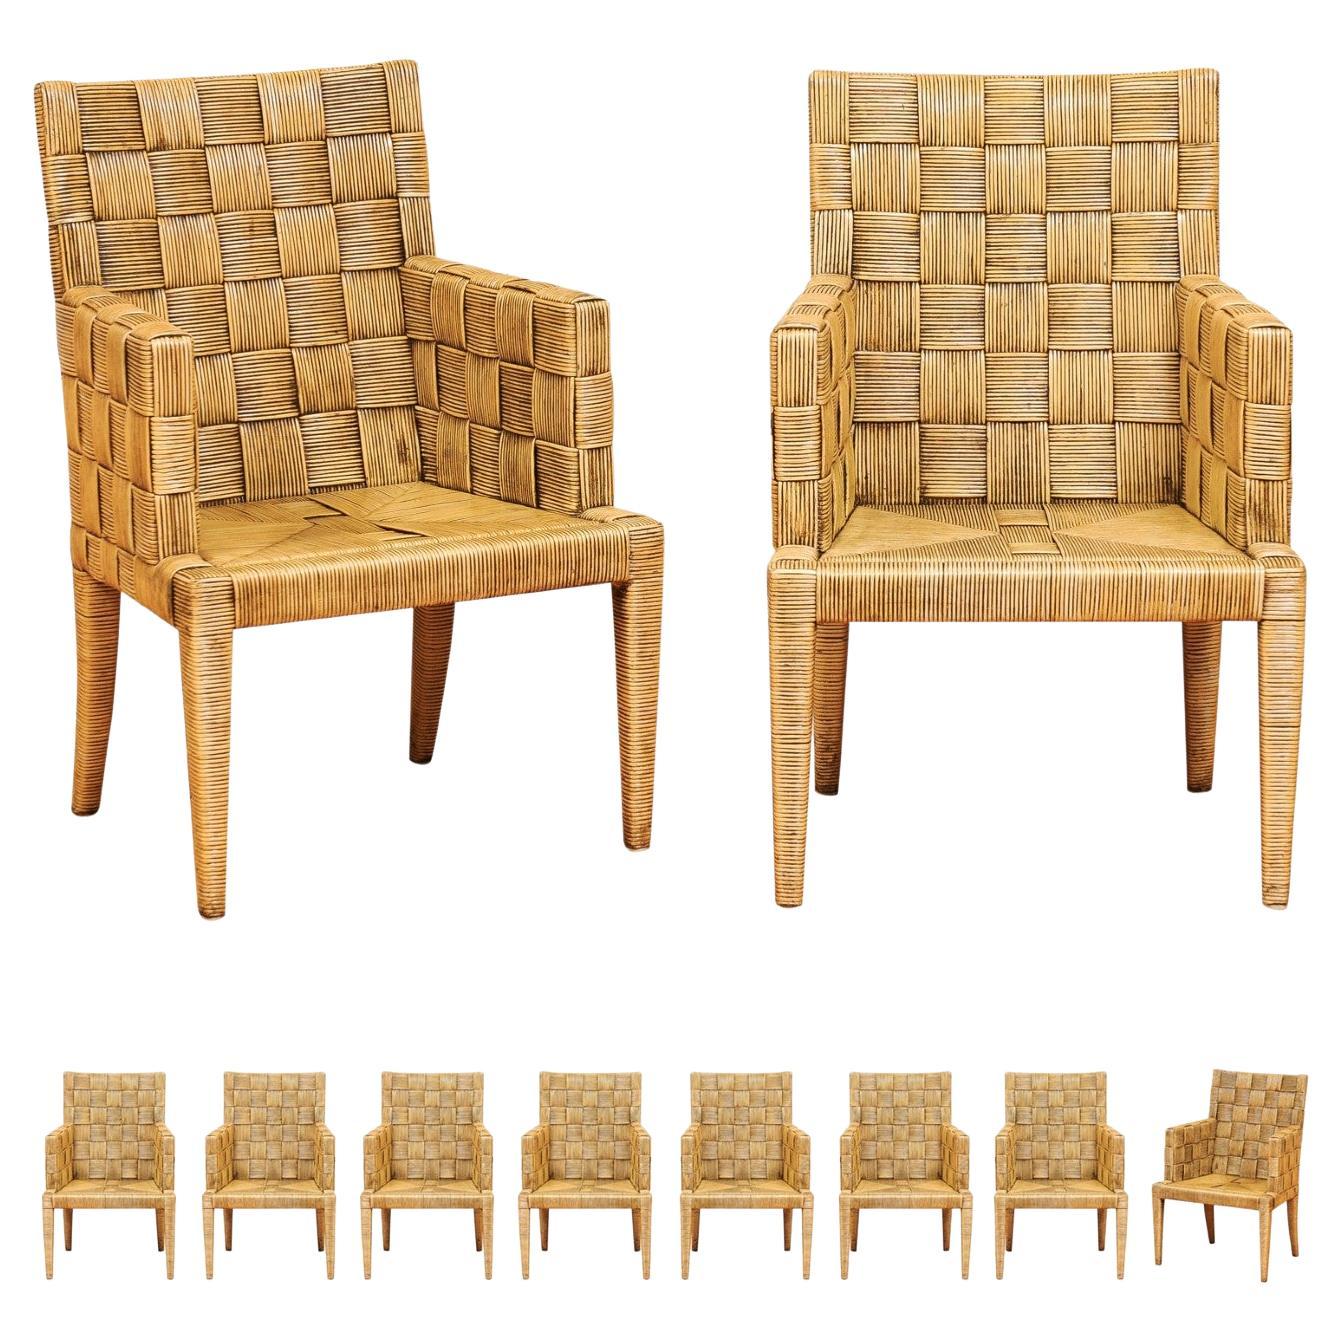 Dazzling Set of 10 Block Island Cane Armchairs by John Hutton for Donghia For Sale